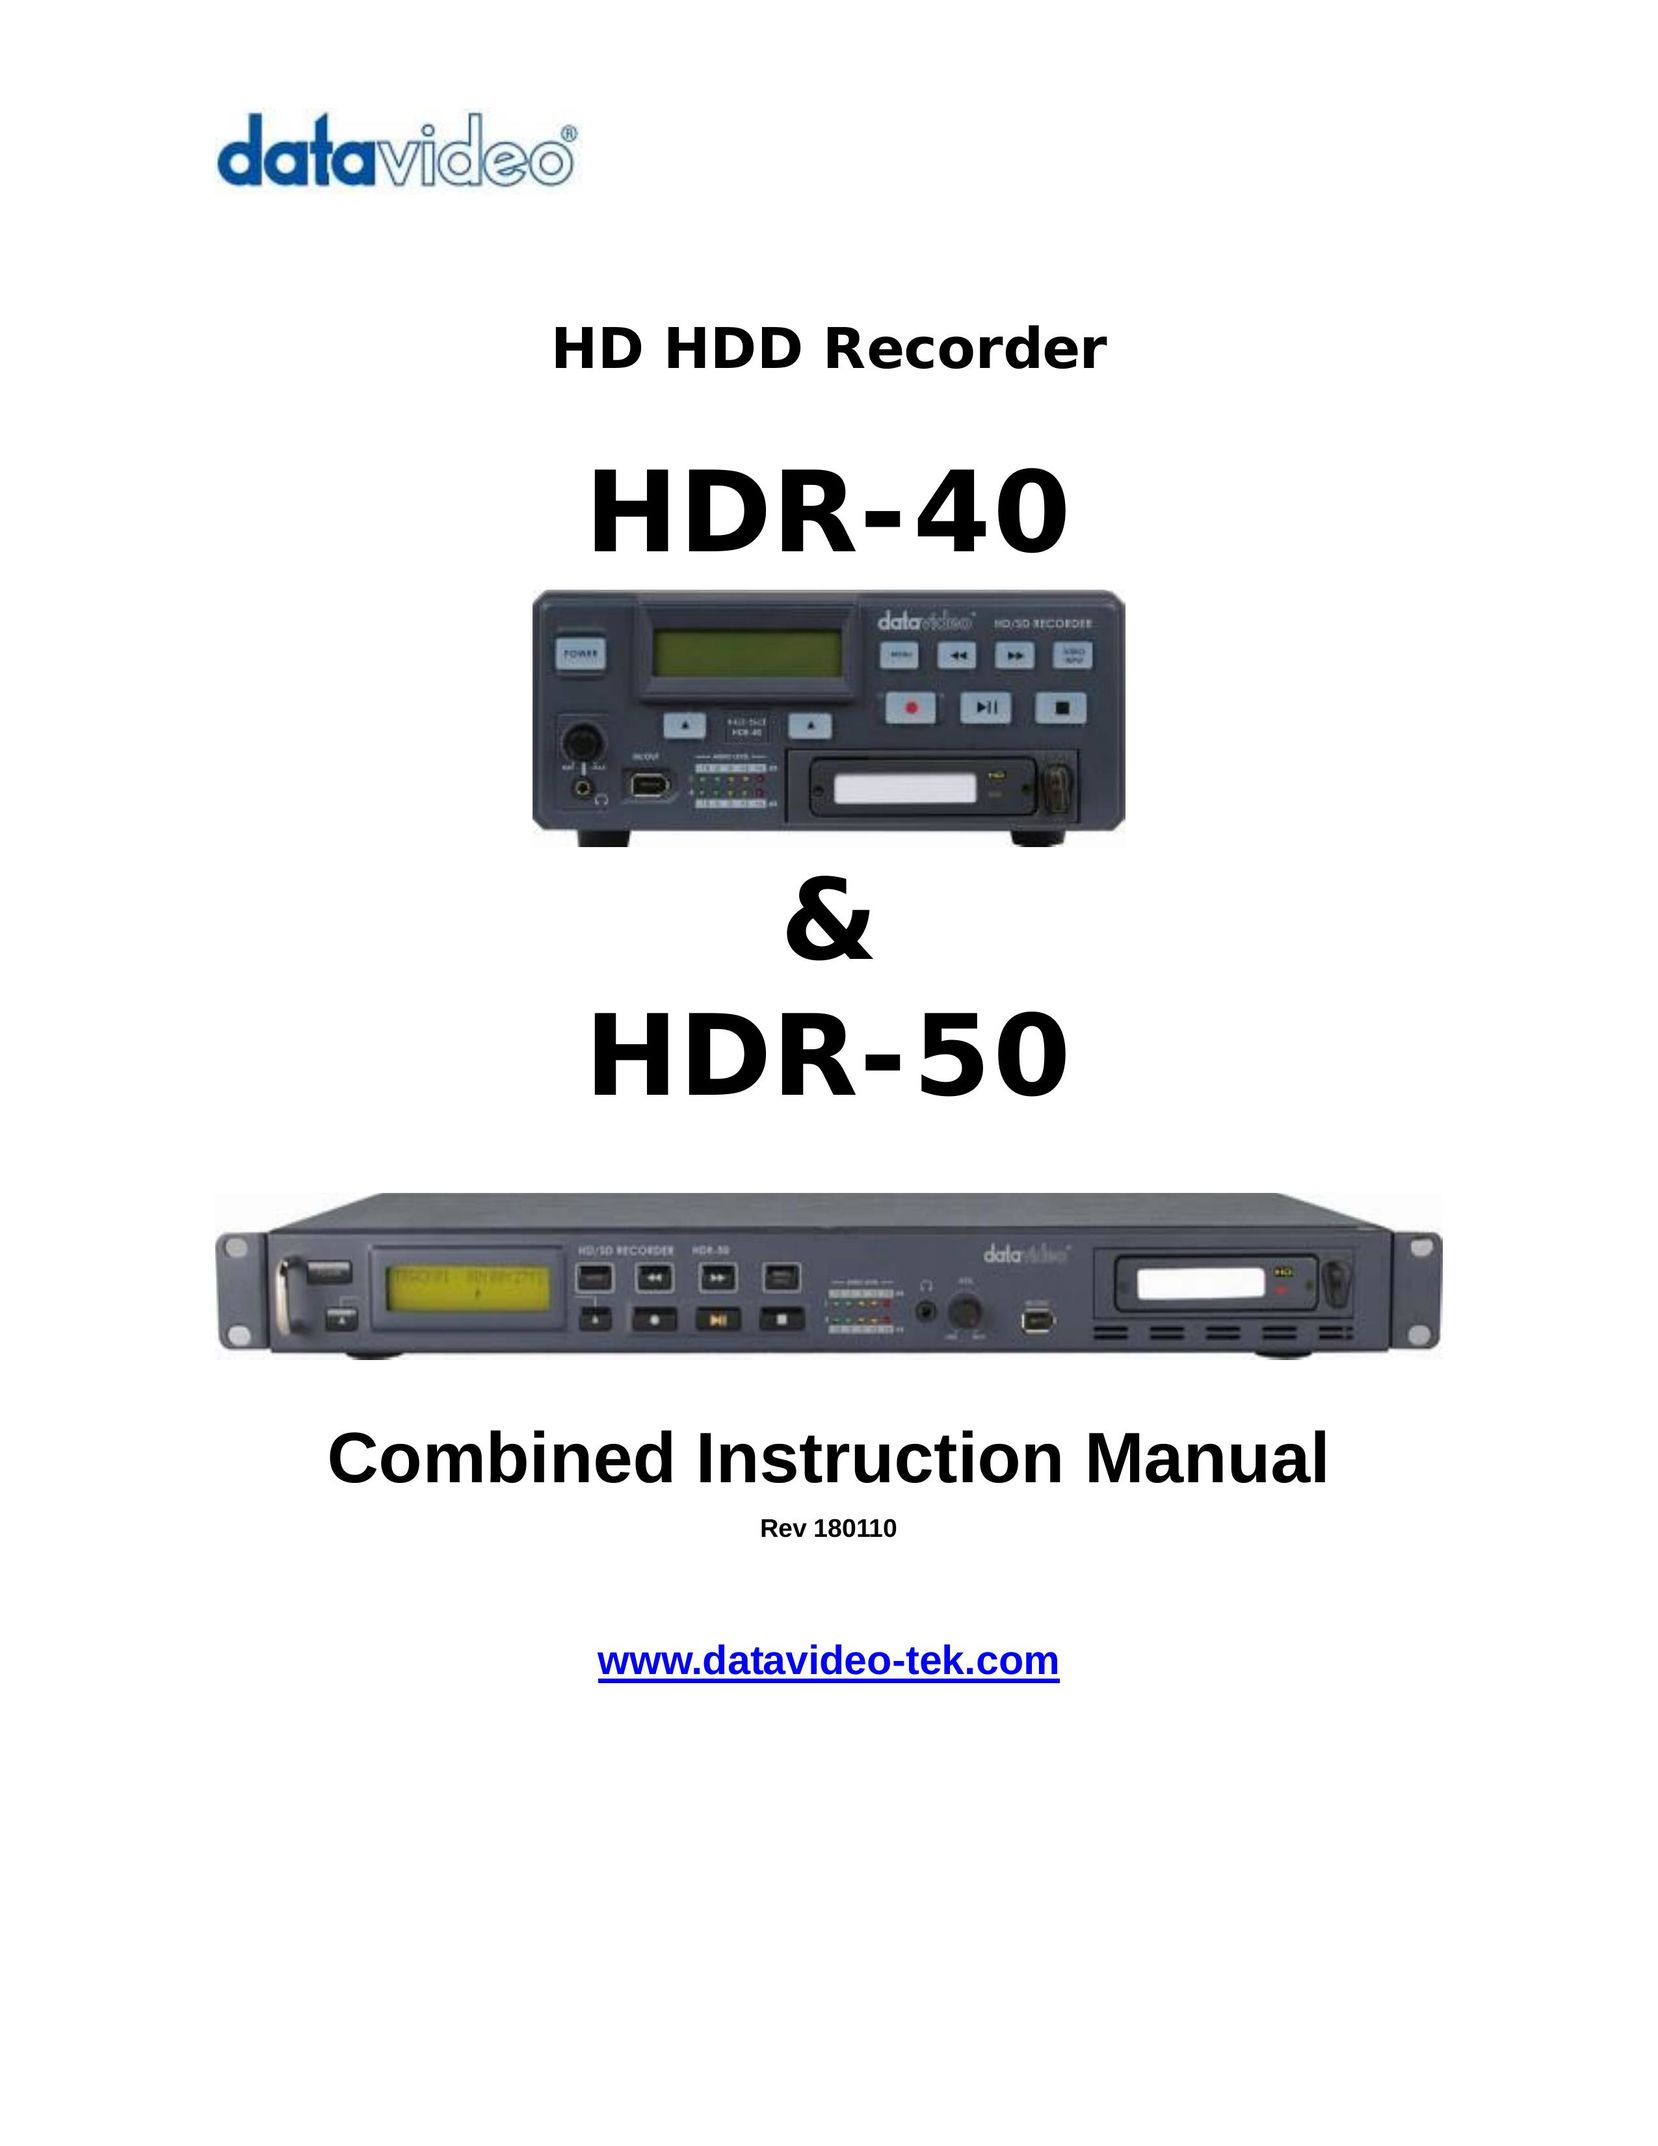 Datavideo HDR60 DVD Recorder User Manual (Page 1)